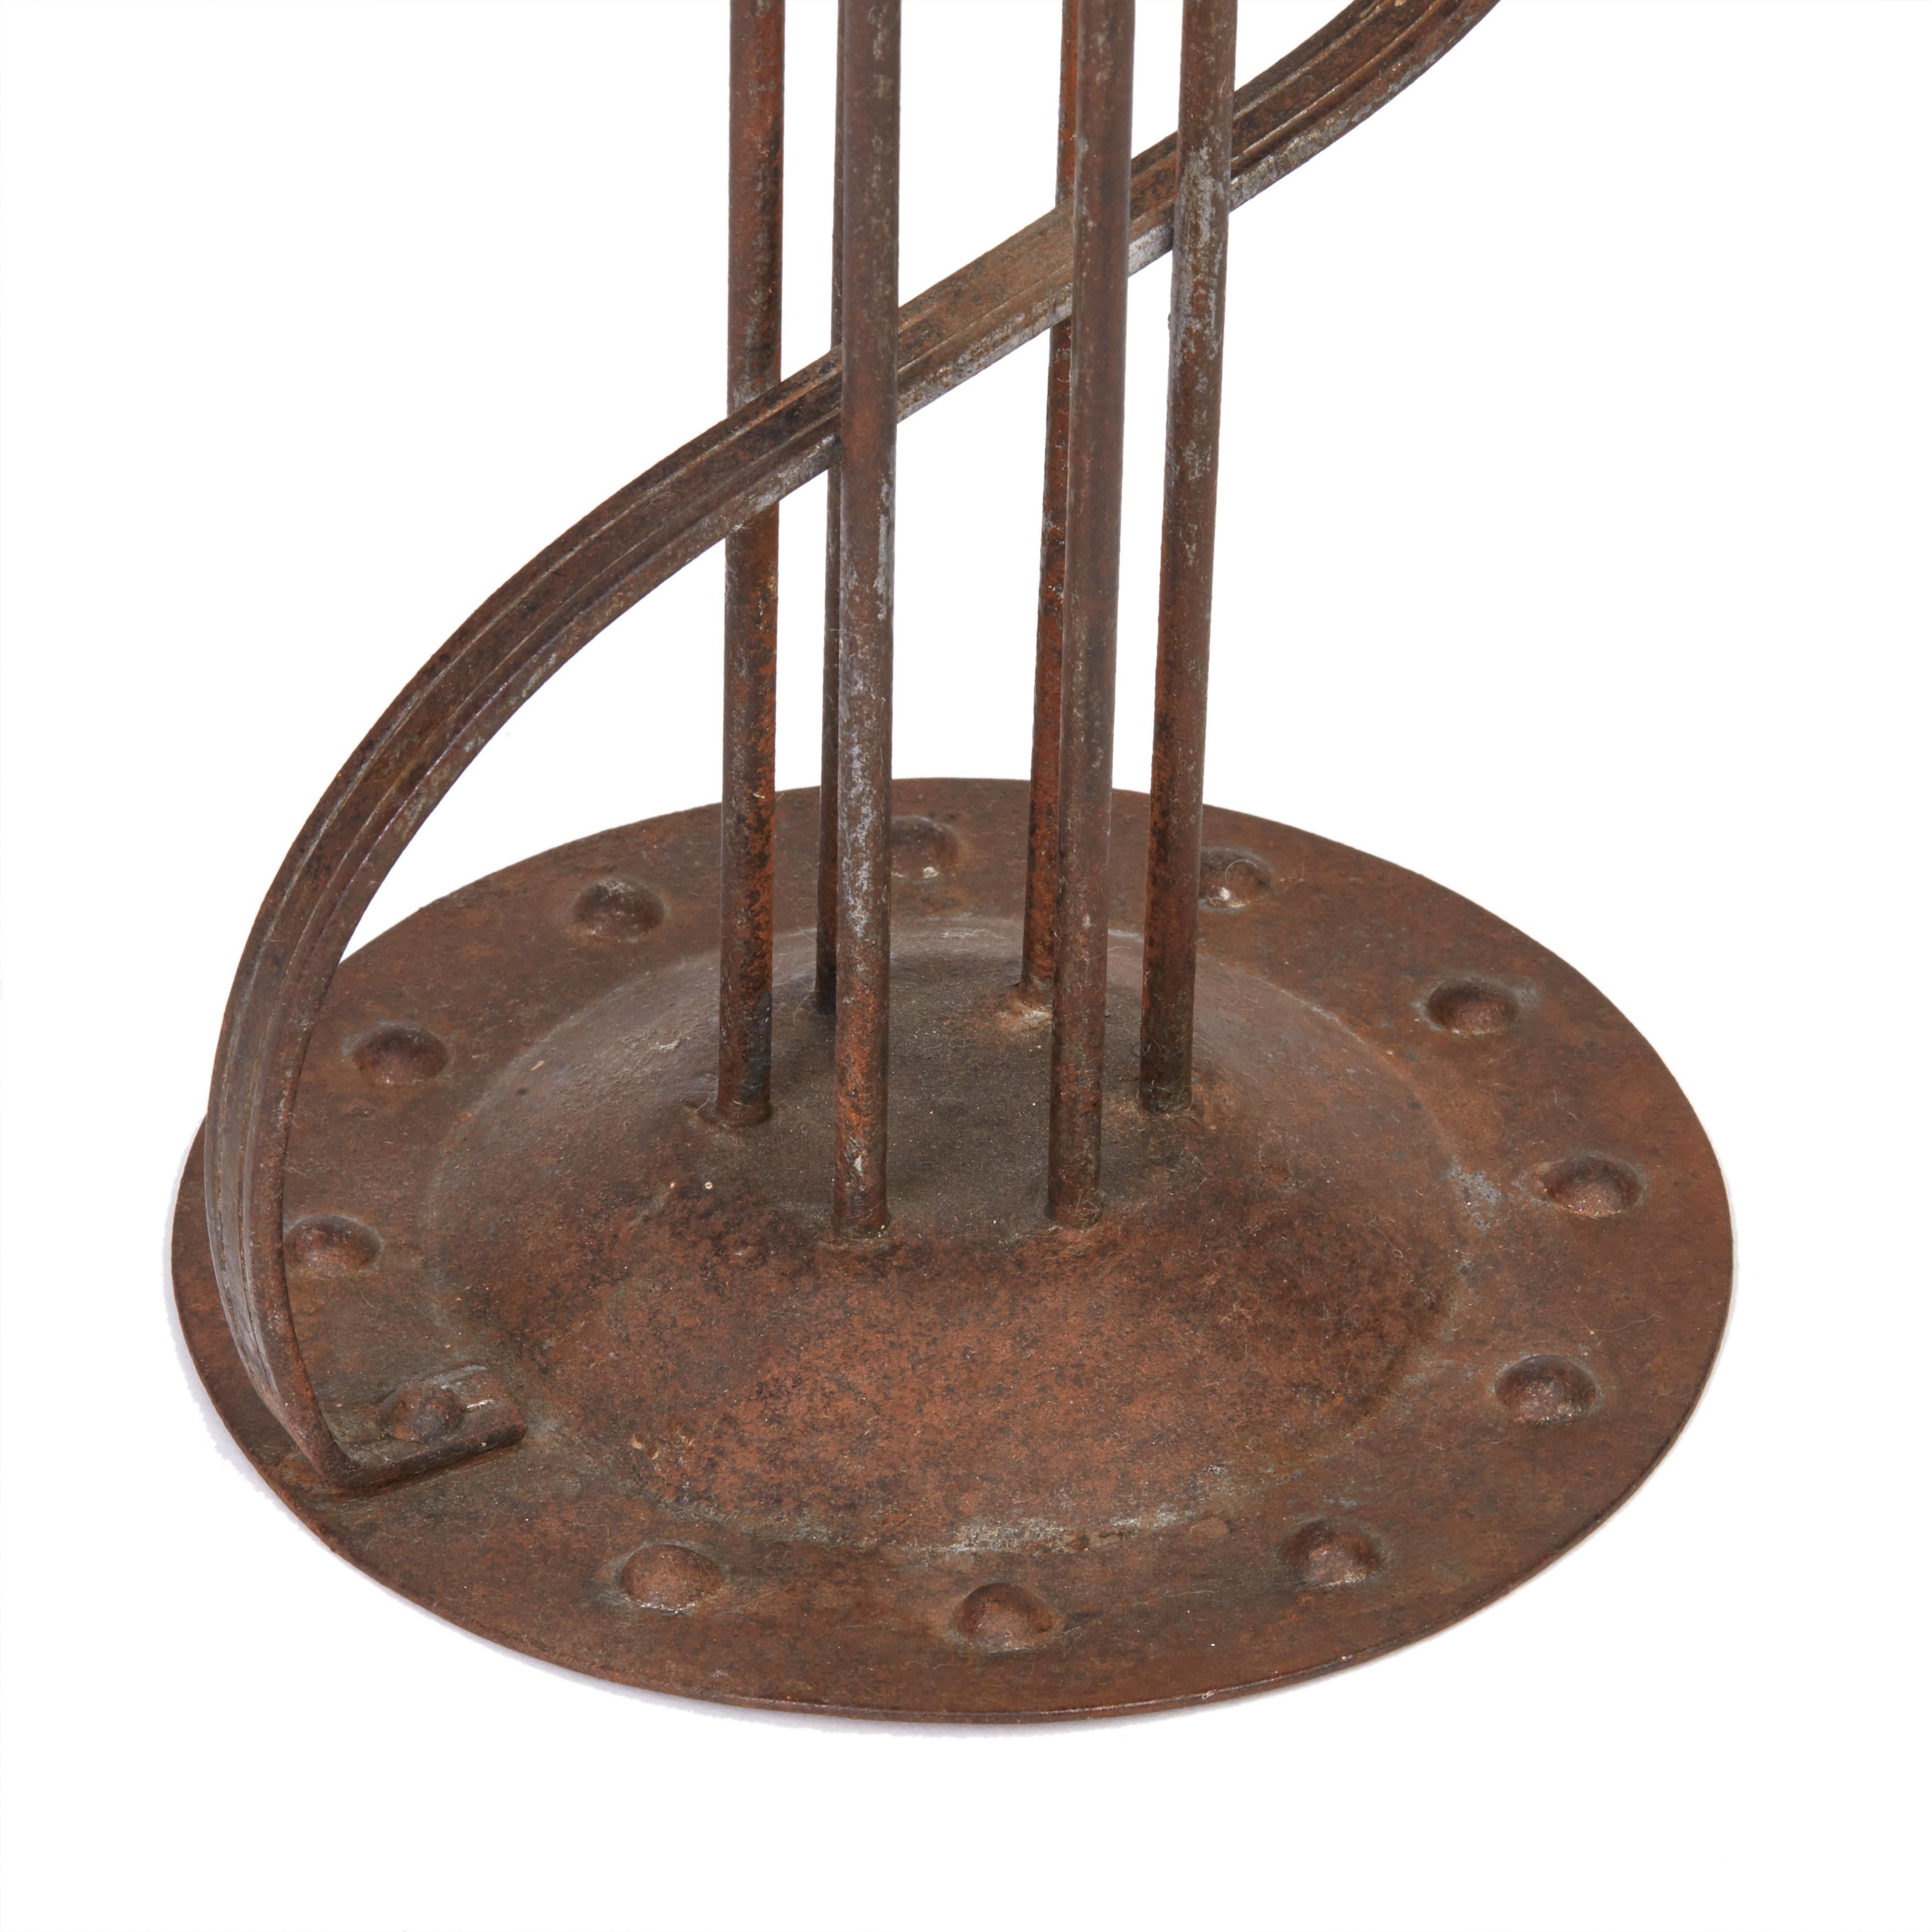 Hand-Crafted Viennese Secessionist Hugo Berger Industrial Art Iron Candlestick, circa 1900